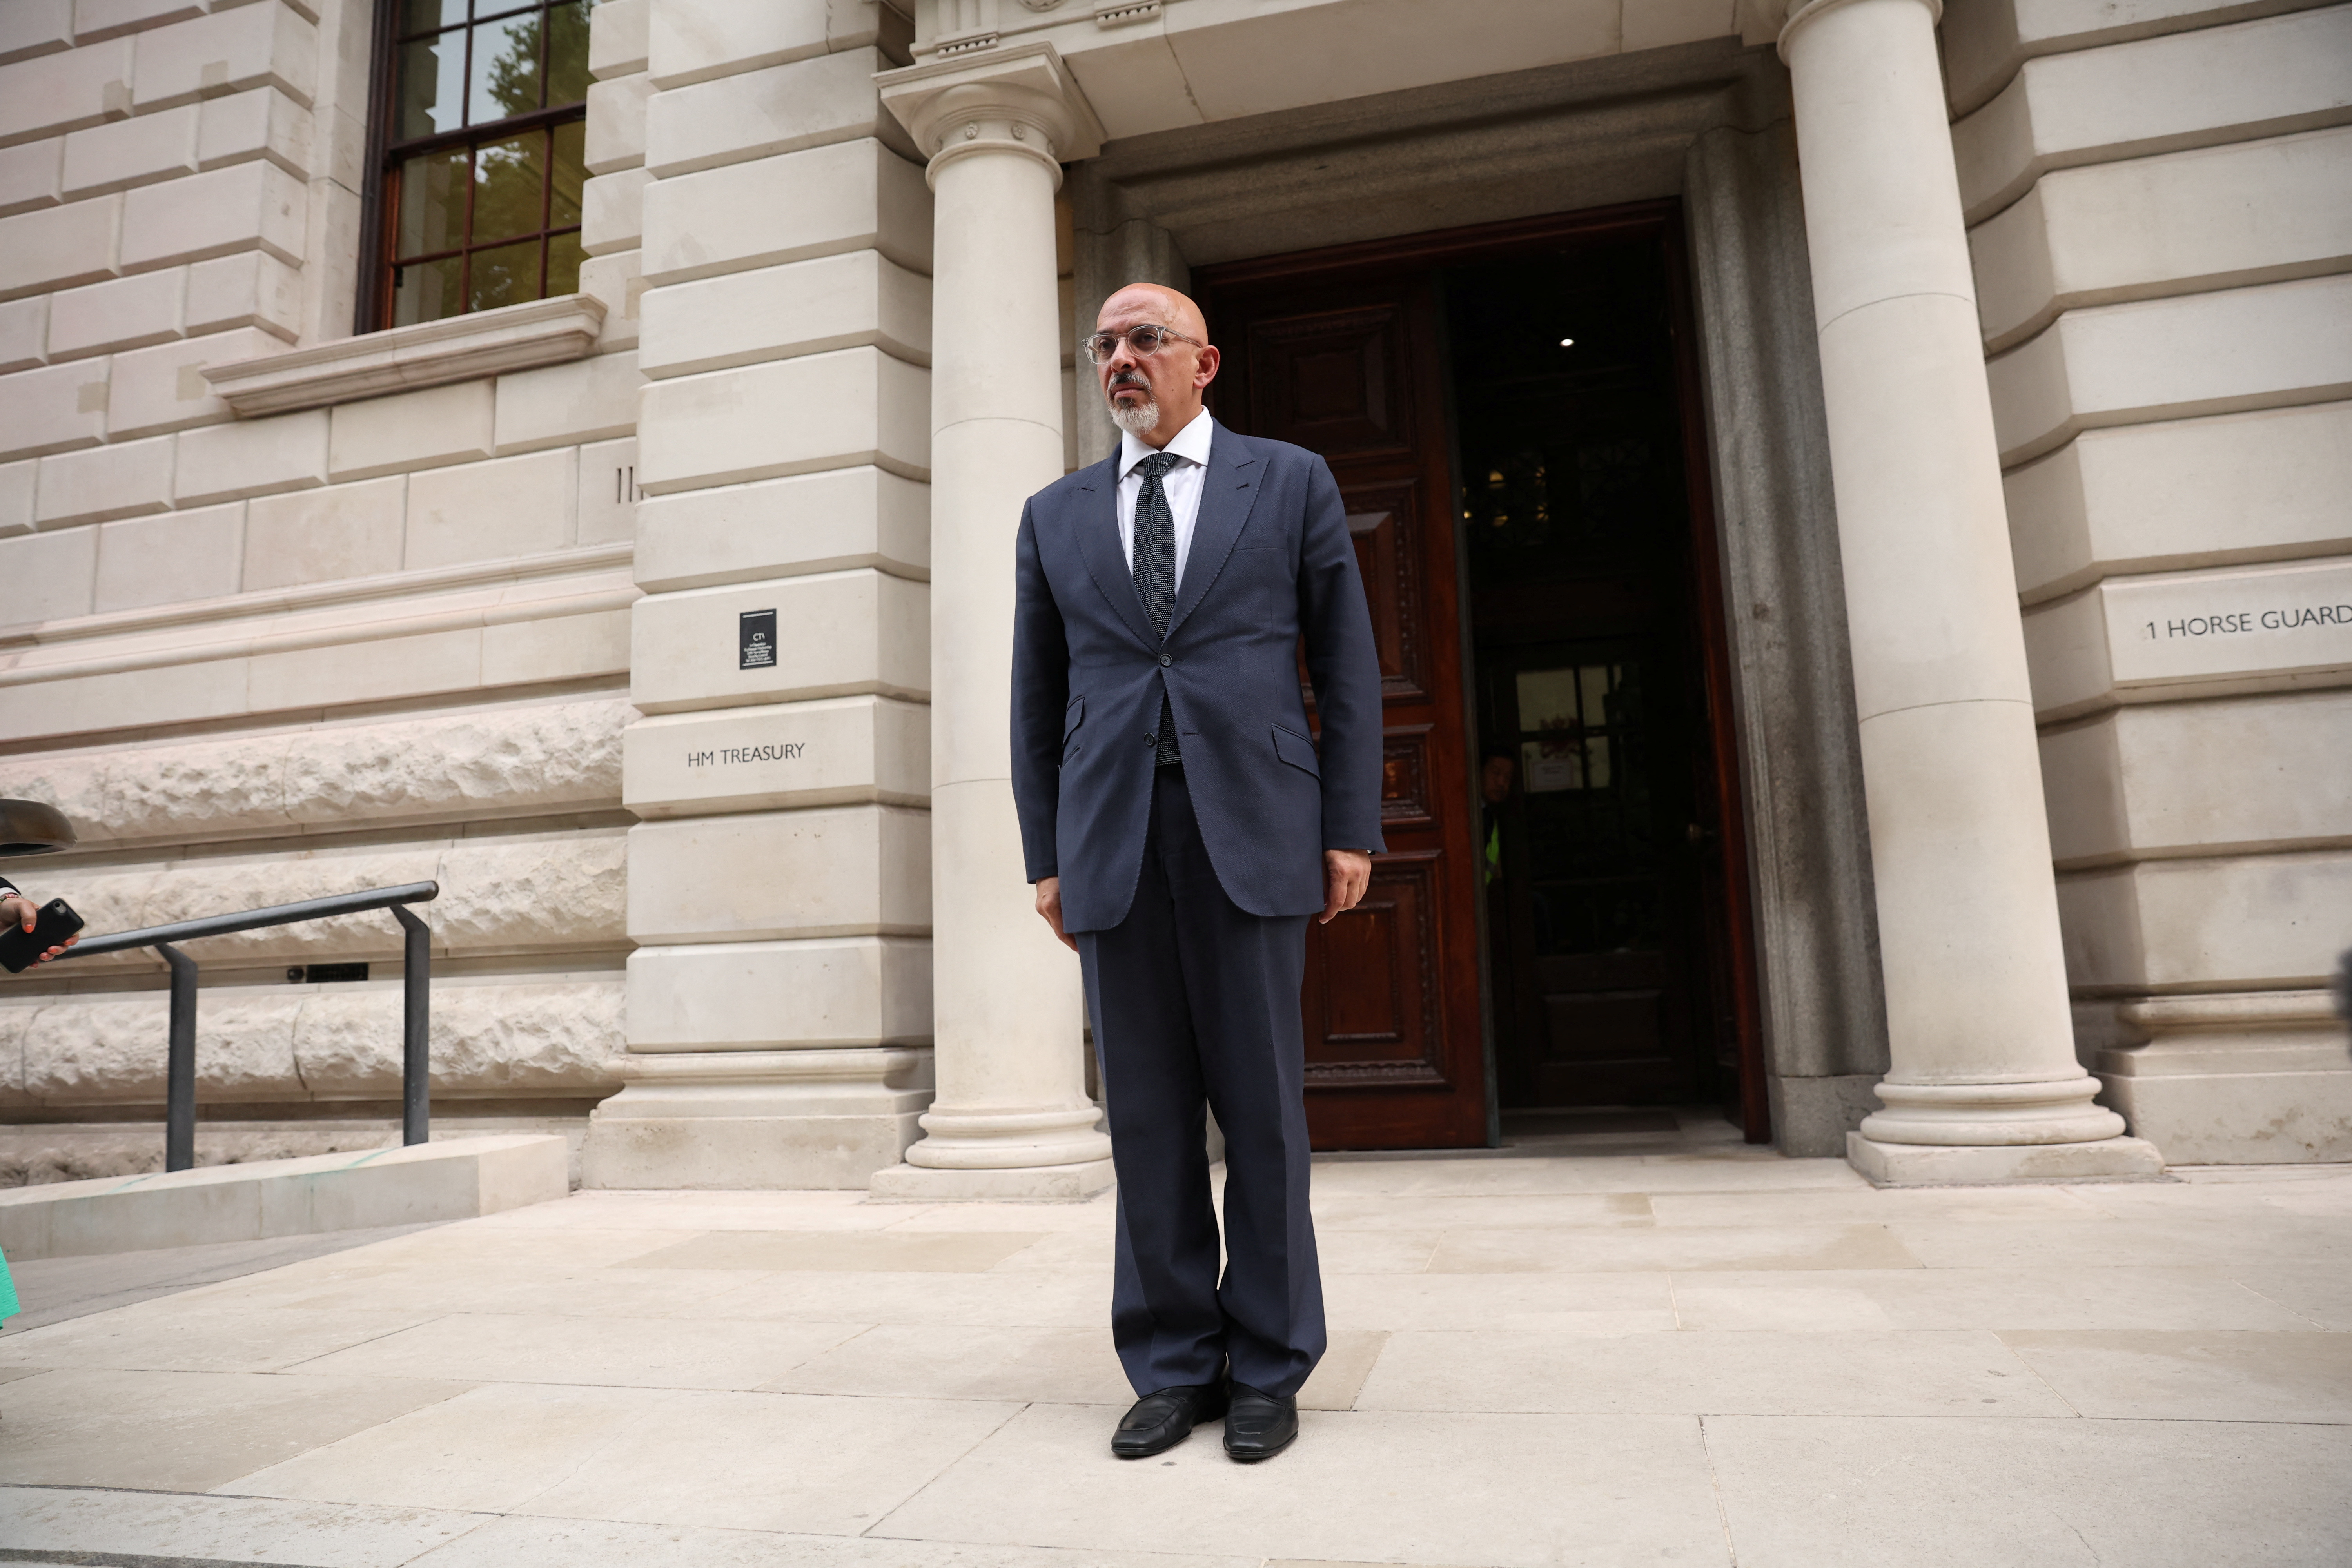 British new Chancellor of the Exchequer Nadhim Zahawi stands near Treasury building, in London